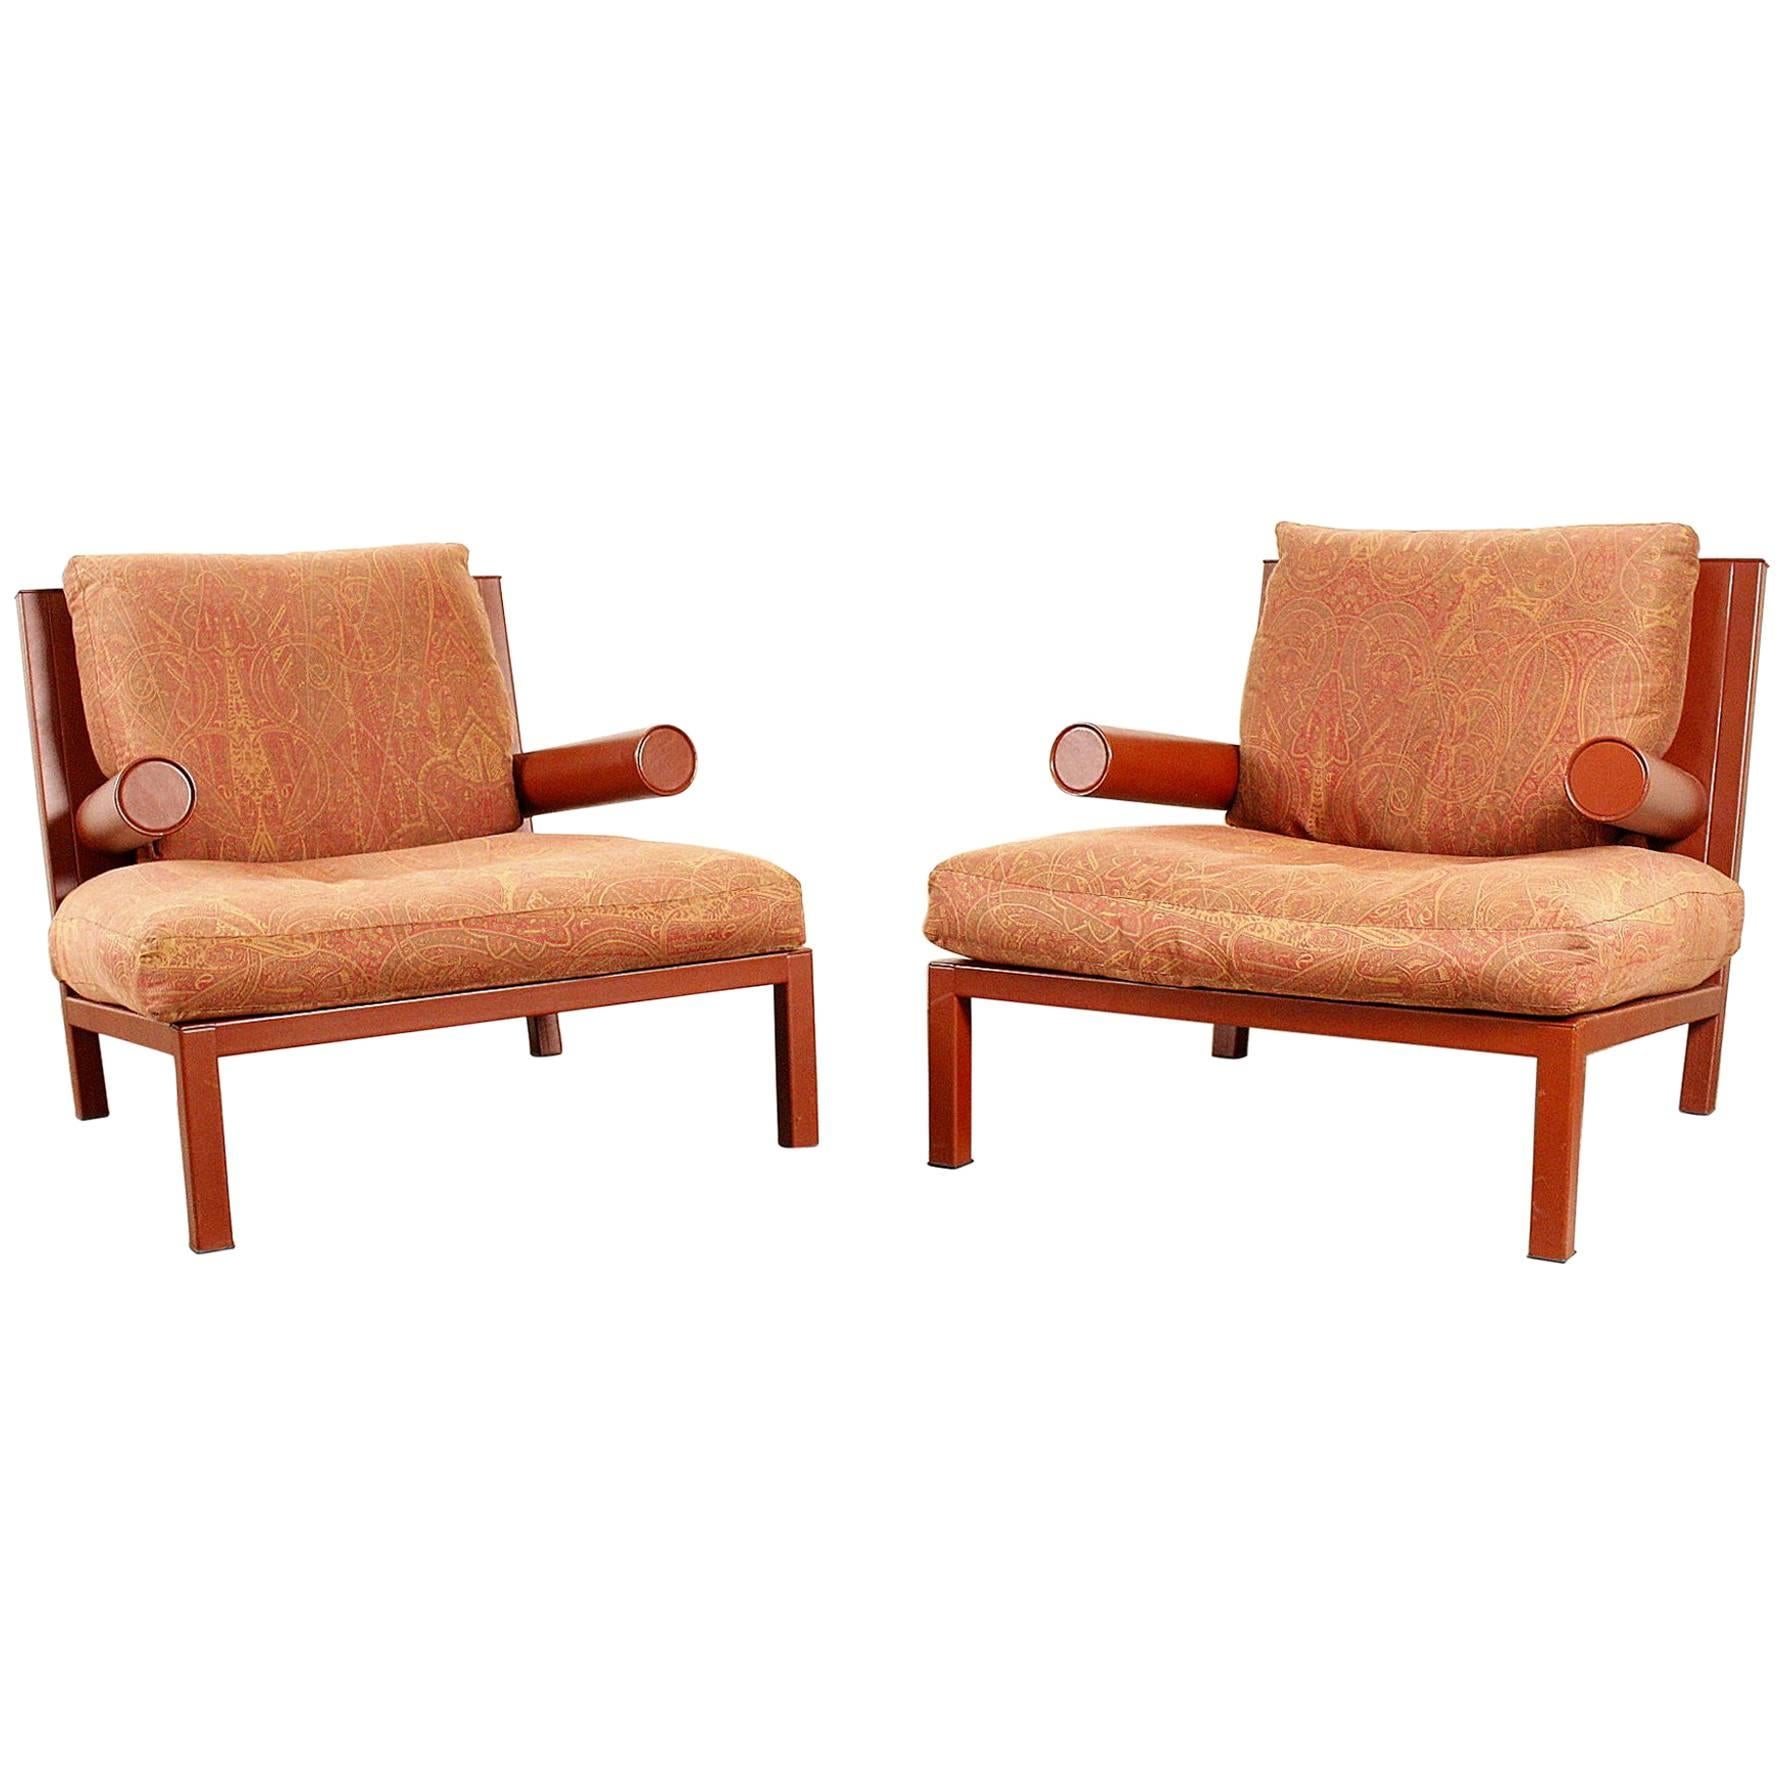 Large Pair of Armchairs 'Baisity' by Antonio Citterio for B&B Italia For Sale